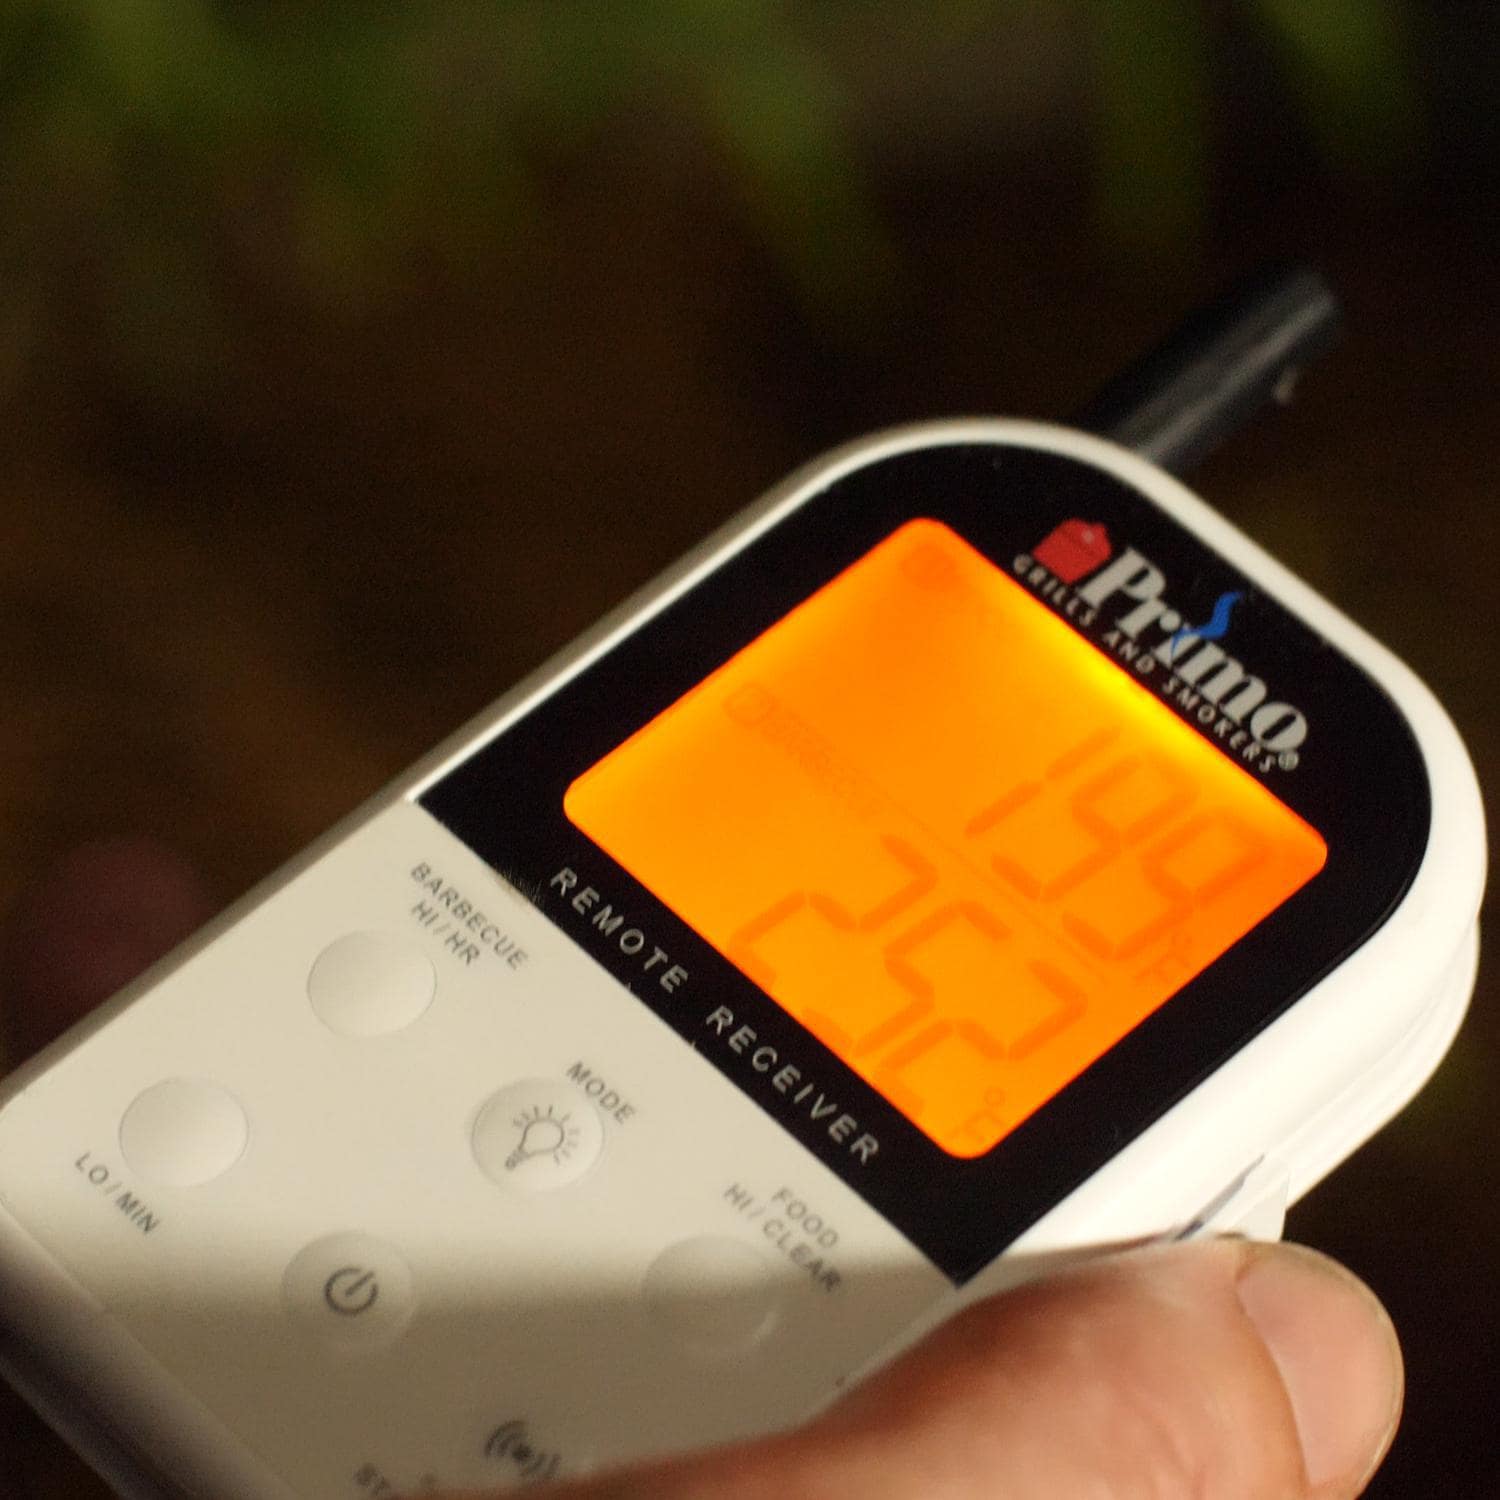 Royal Solutions Indoor Outdoor Temperature Digital Wireless Thermometer  Remote